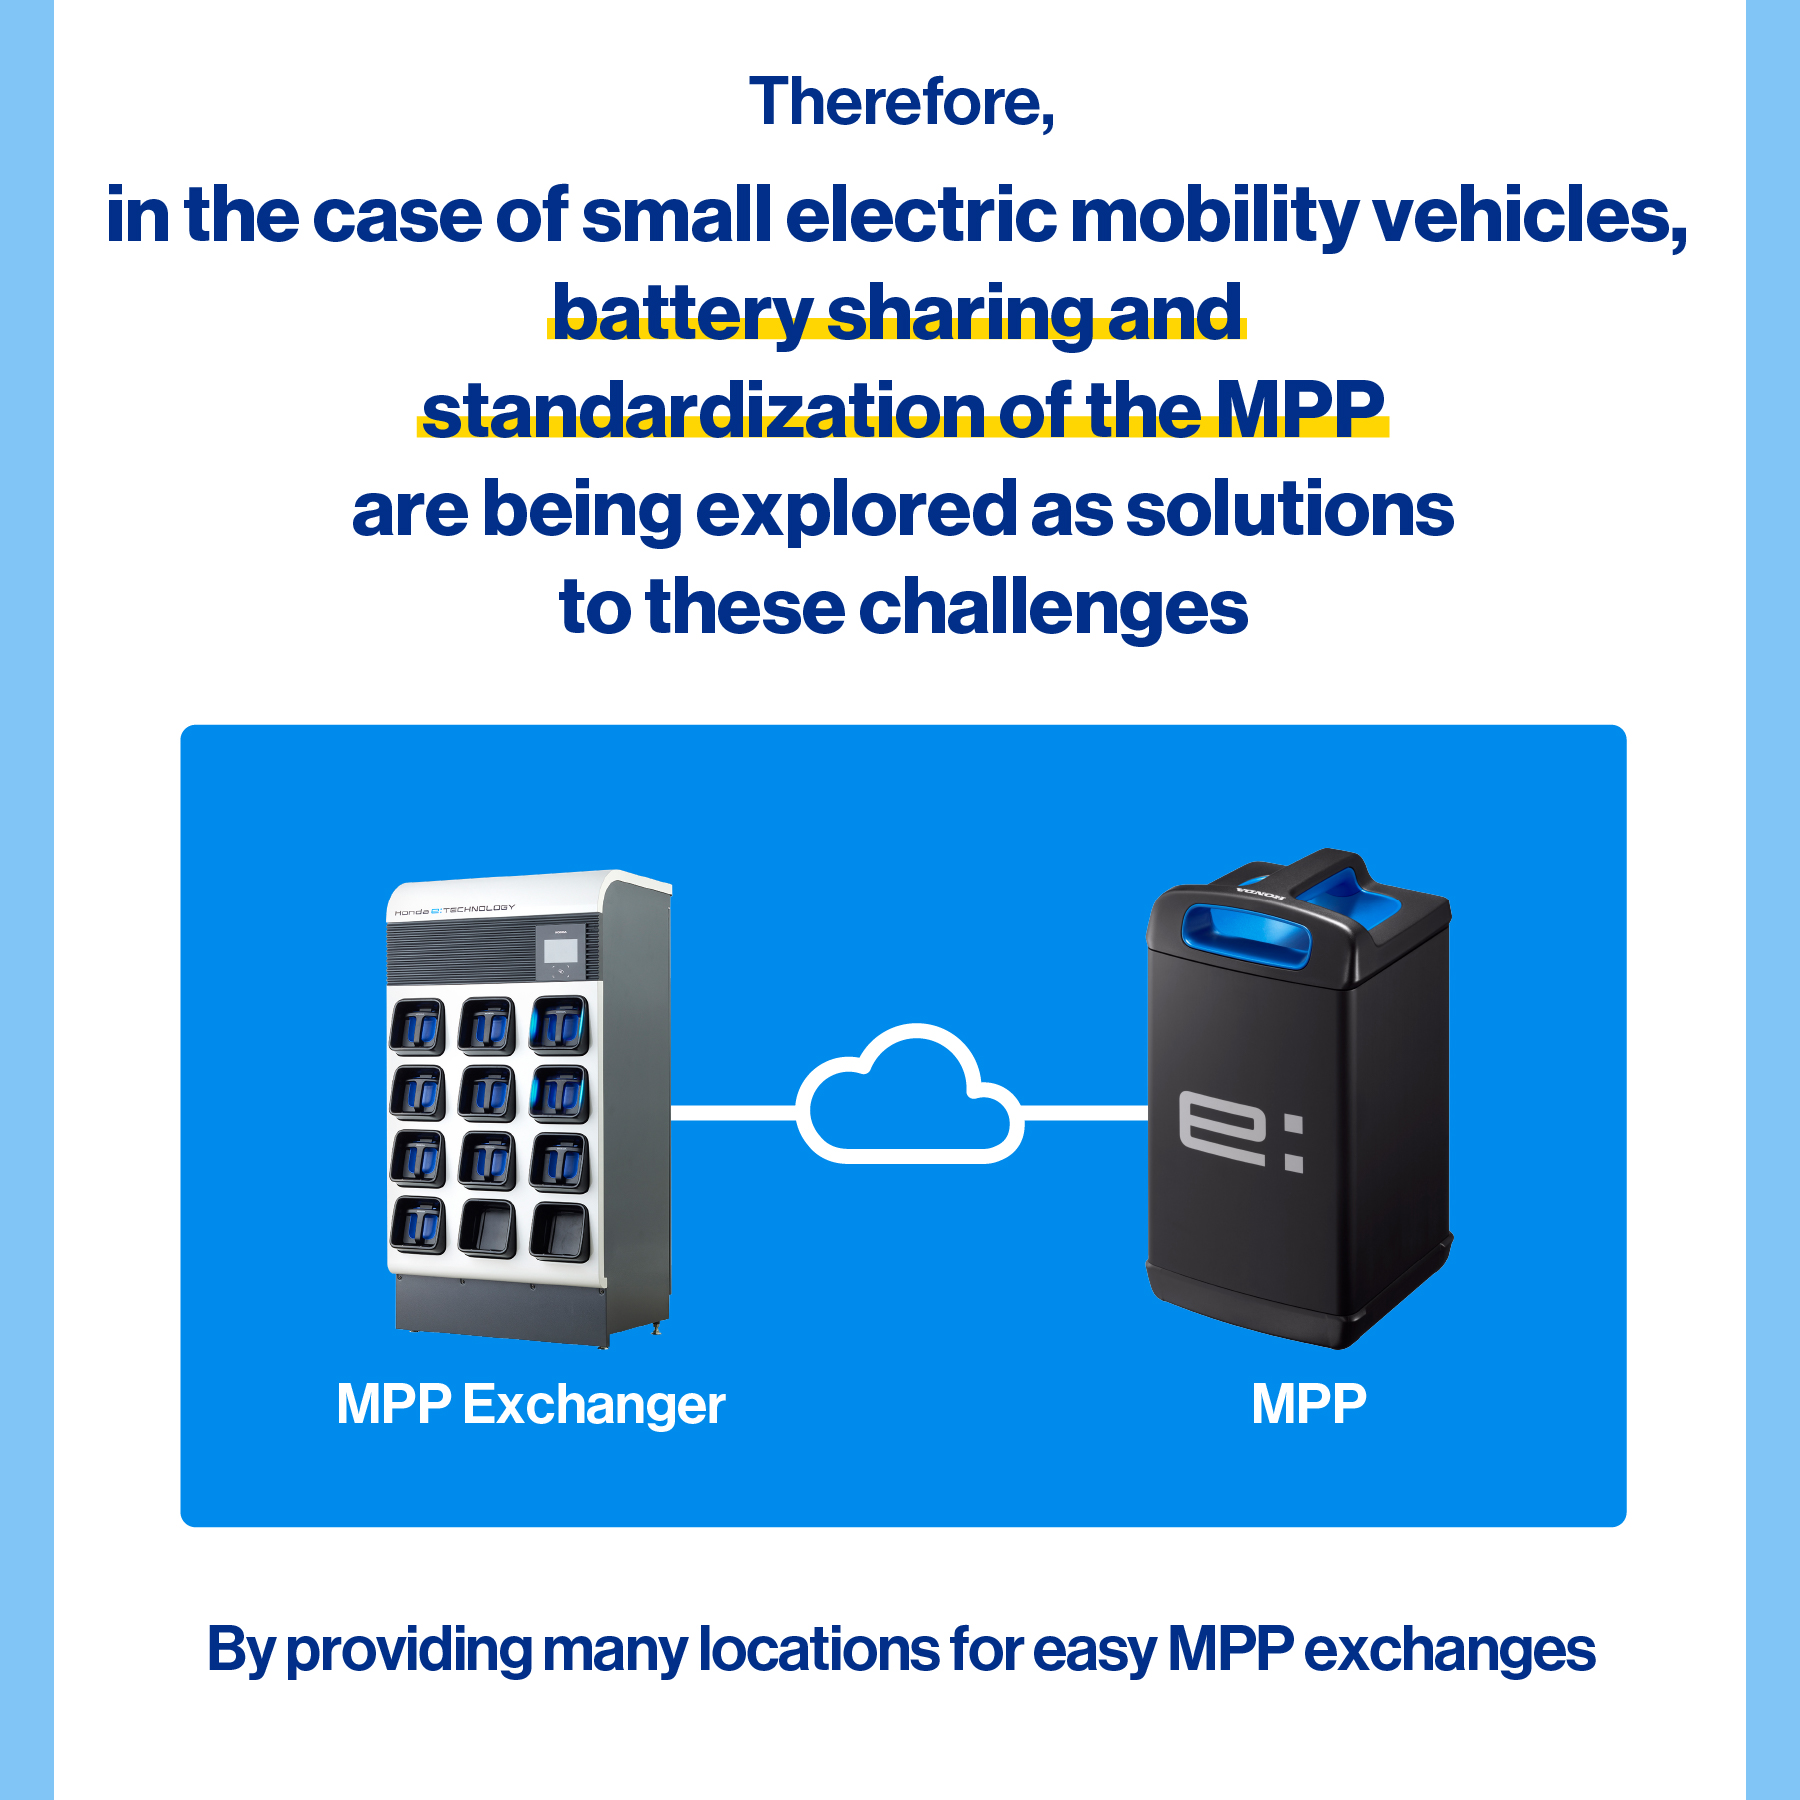 Battery sharing and standardization of the Mobile Power Pack